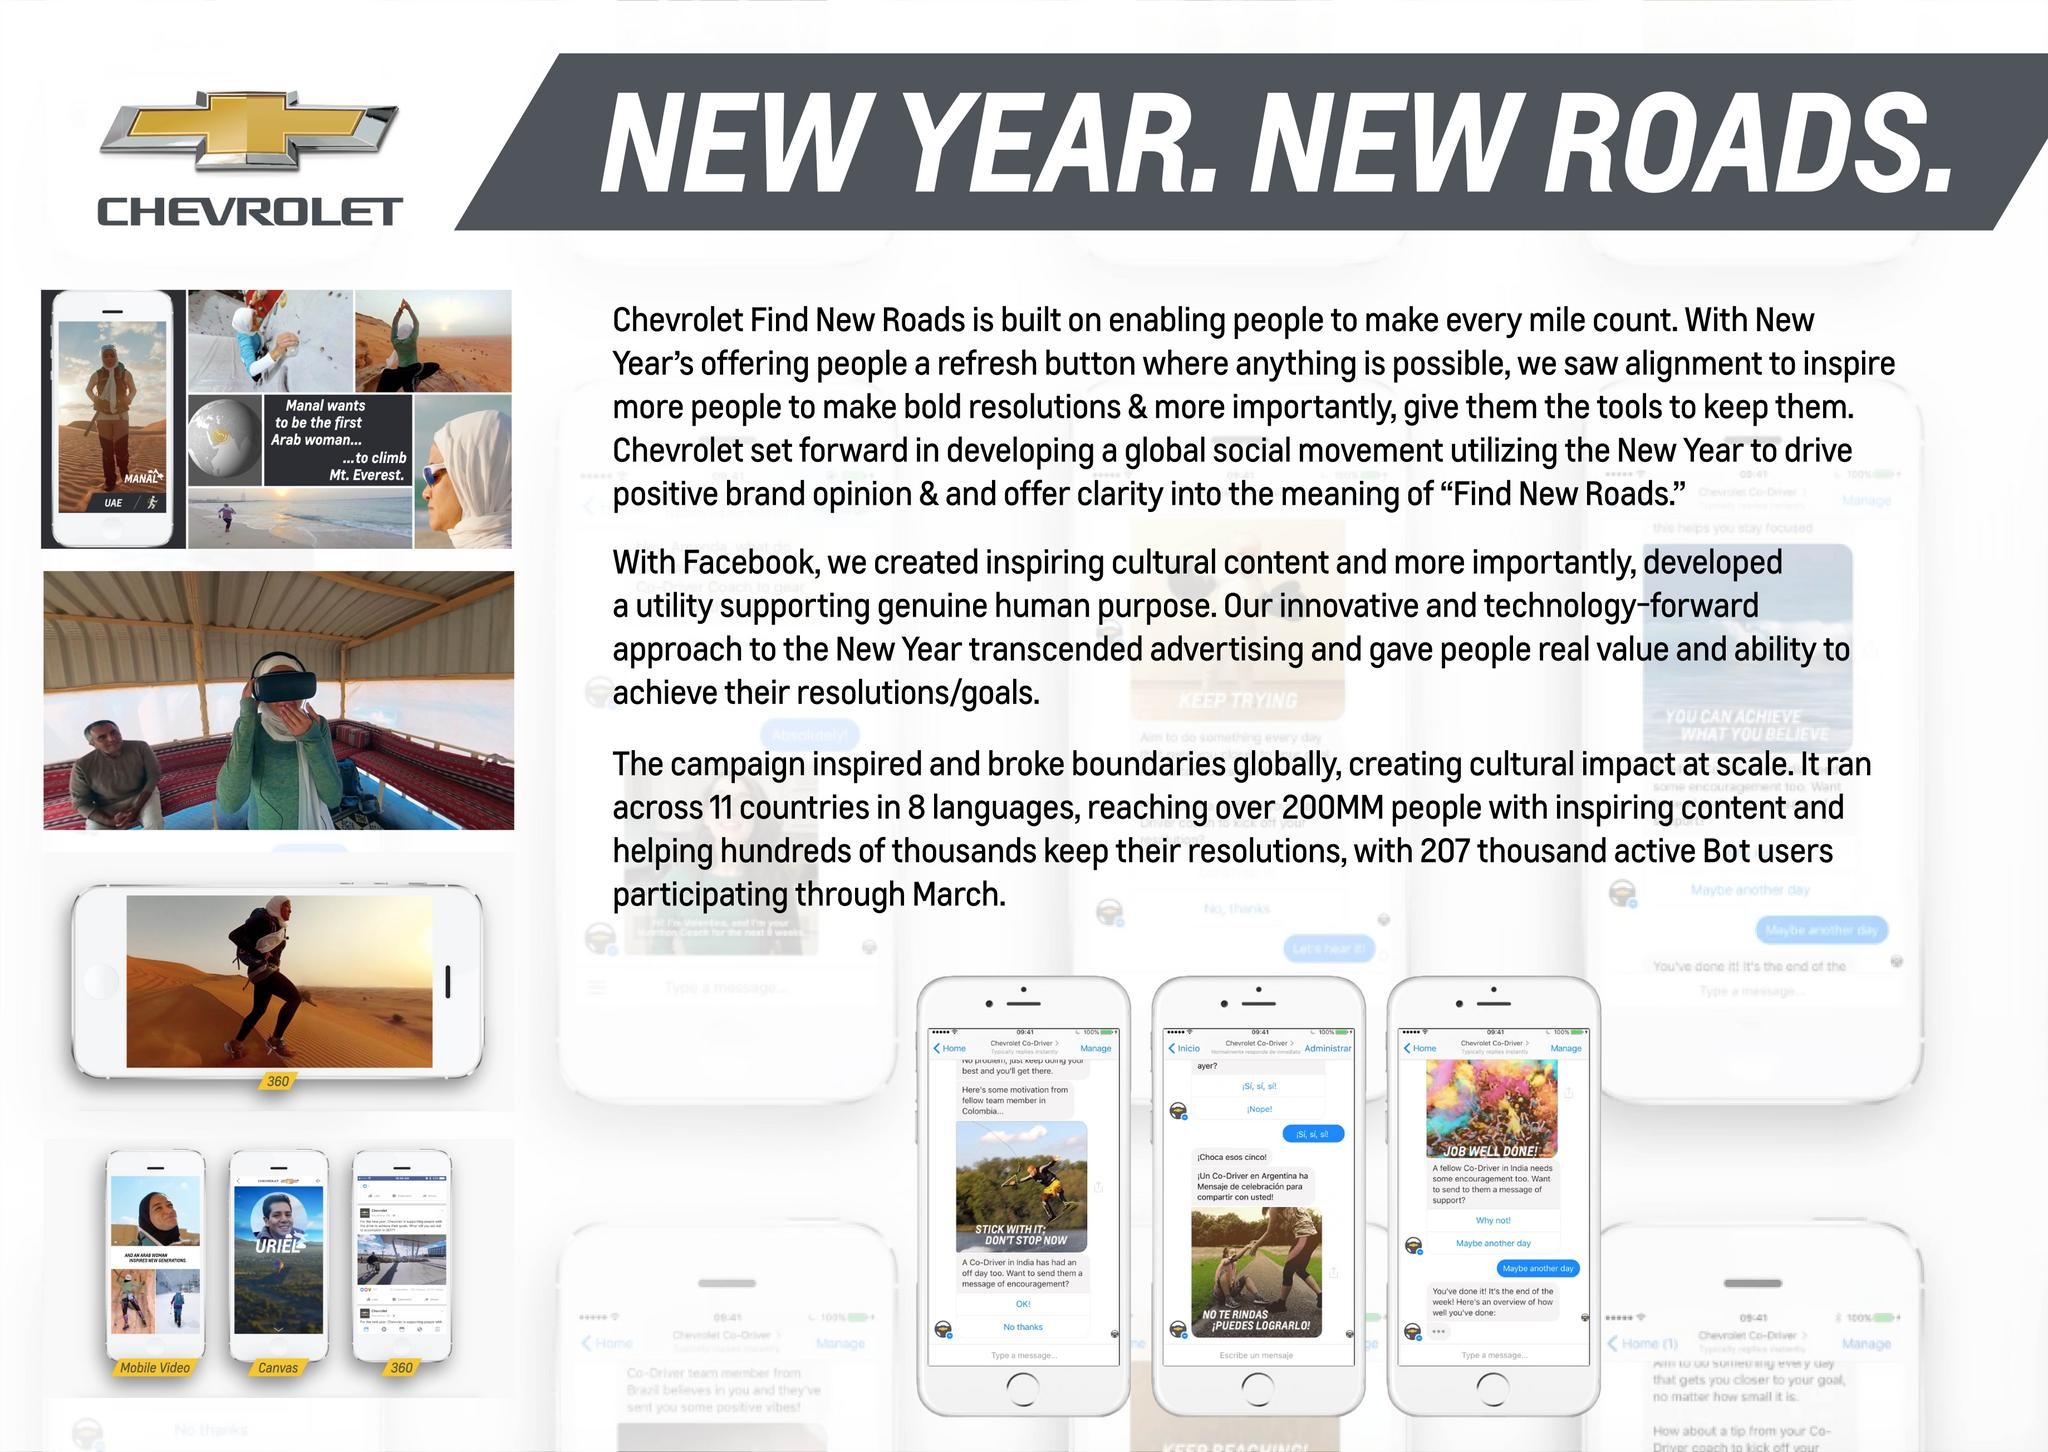 Chevrolet and Facebook Partnership, 'New Year. New Roads.'